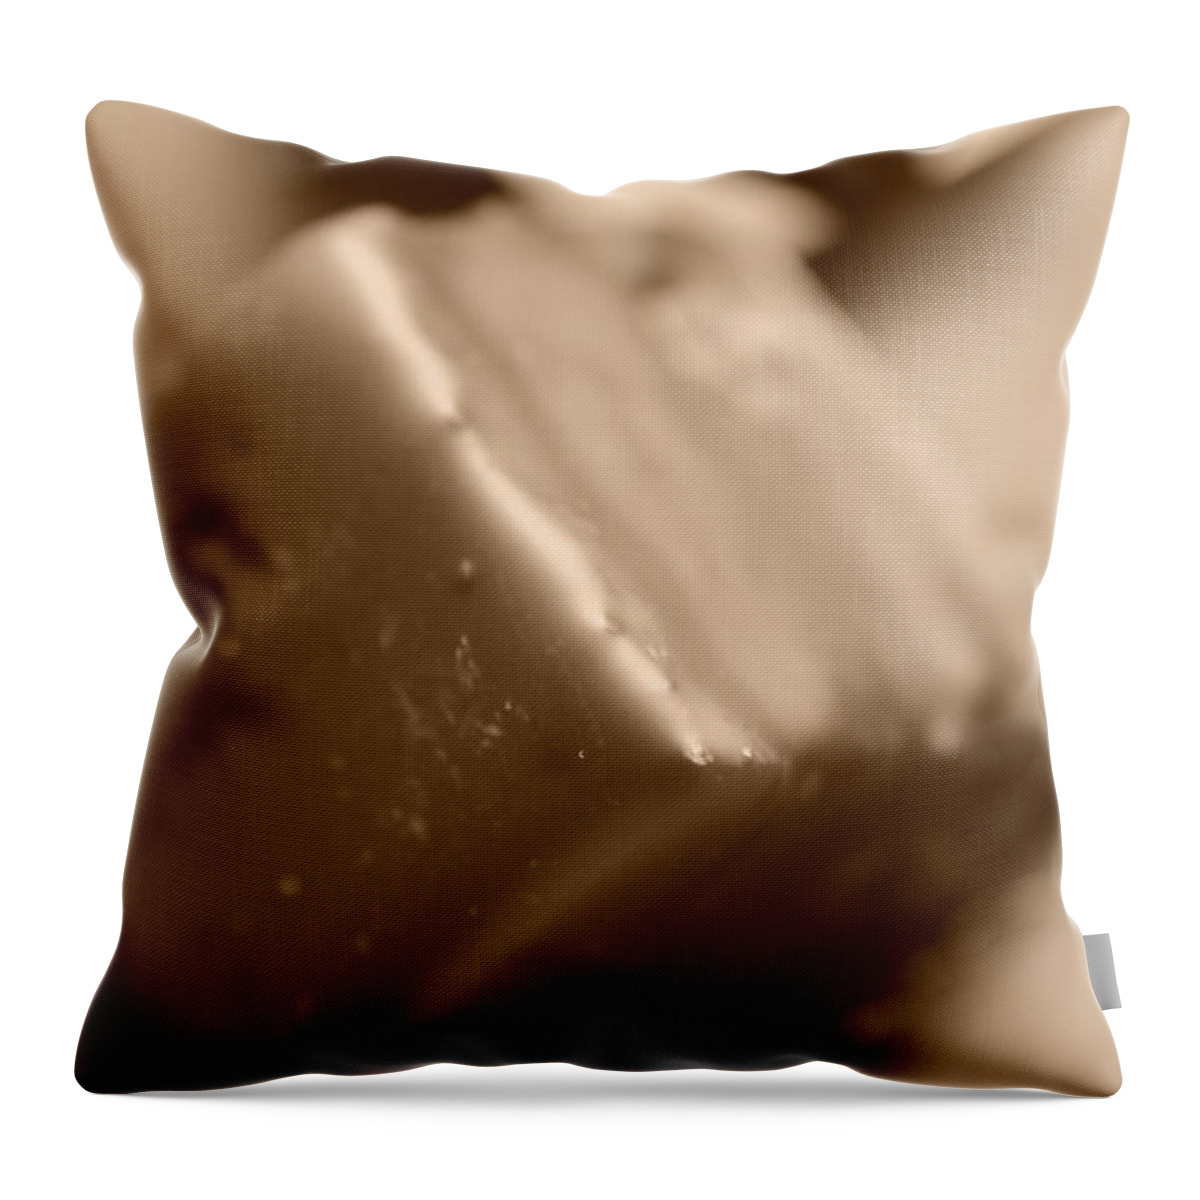 Love Throw Pillow featuring the photograph Chocolate Squares by Miguel Winterpacht